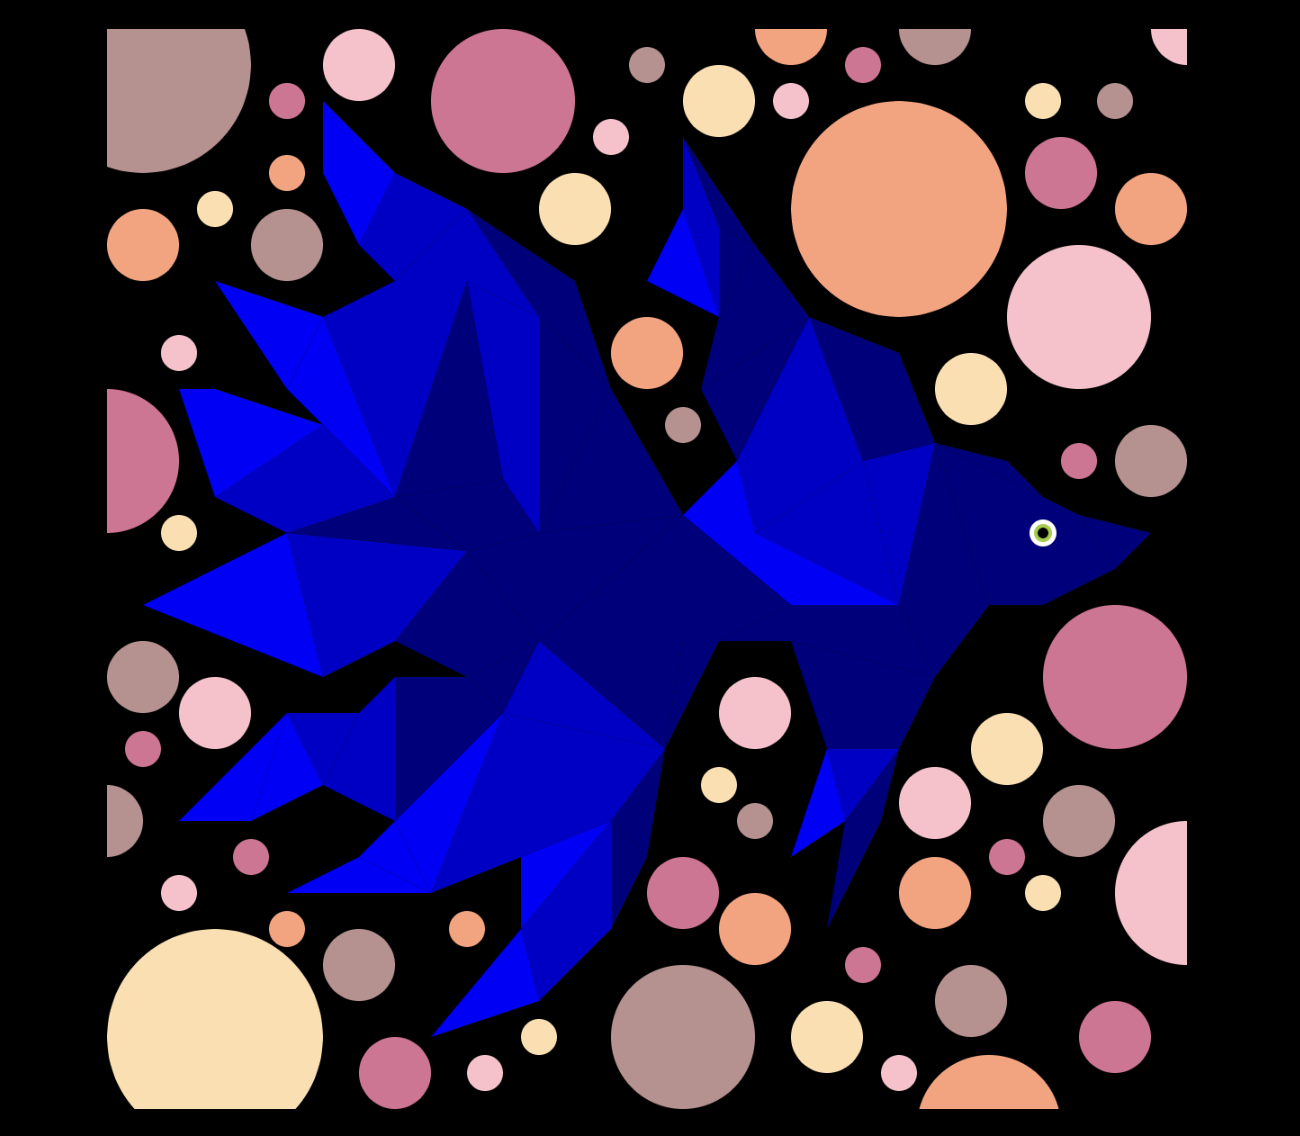 Beta fish with large tail made of blue shapes surrounded by circles in different shades of coral and pink bubbles on a black background.